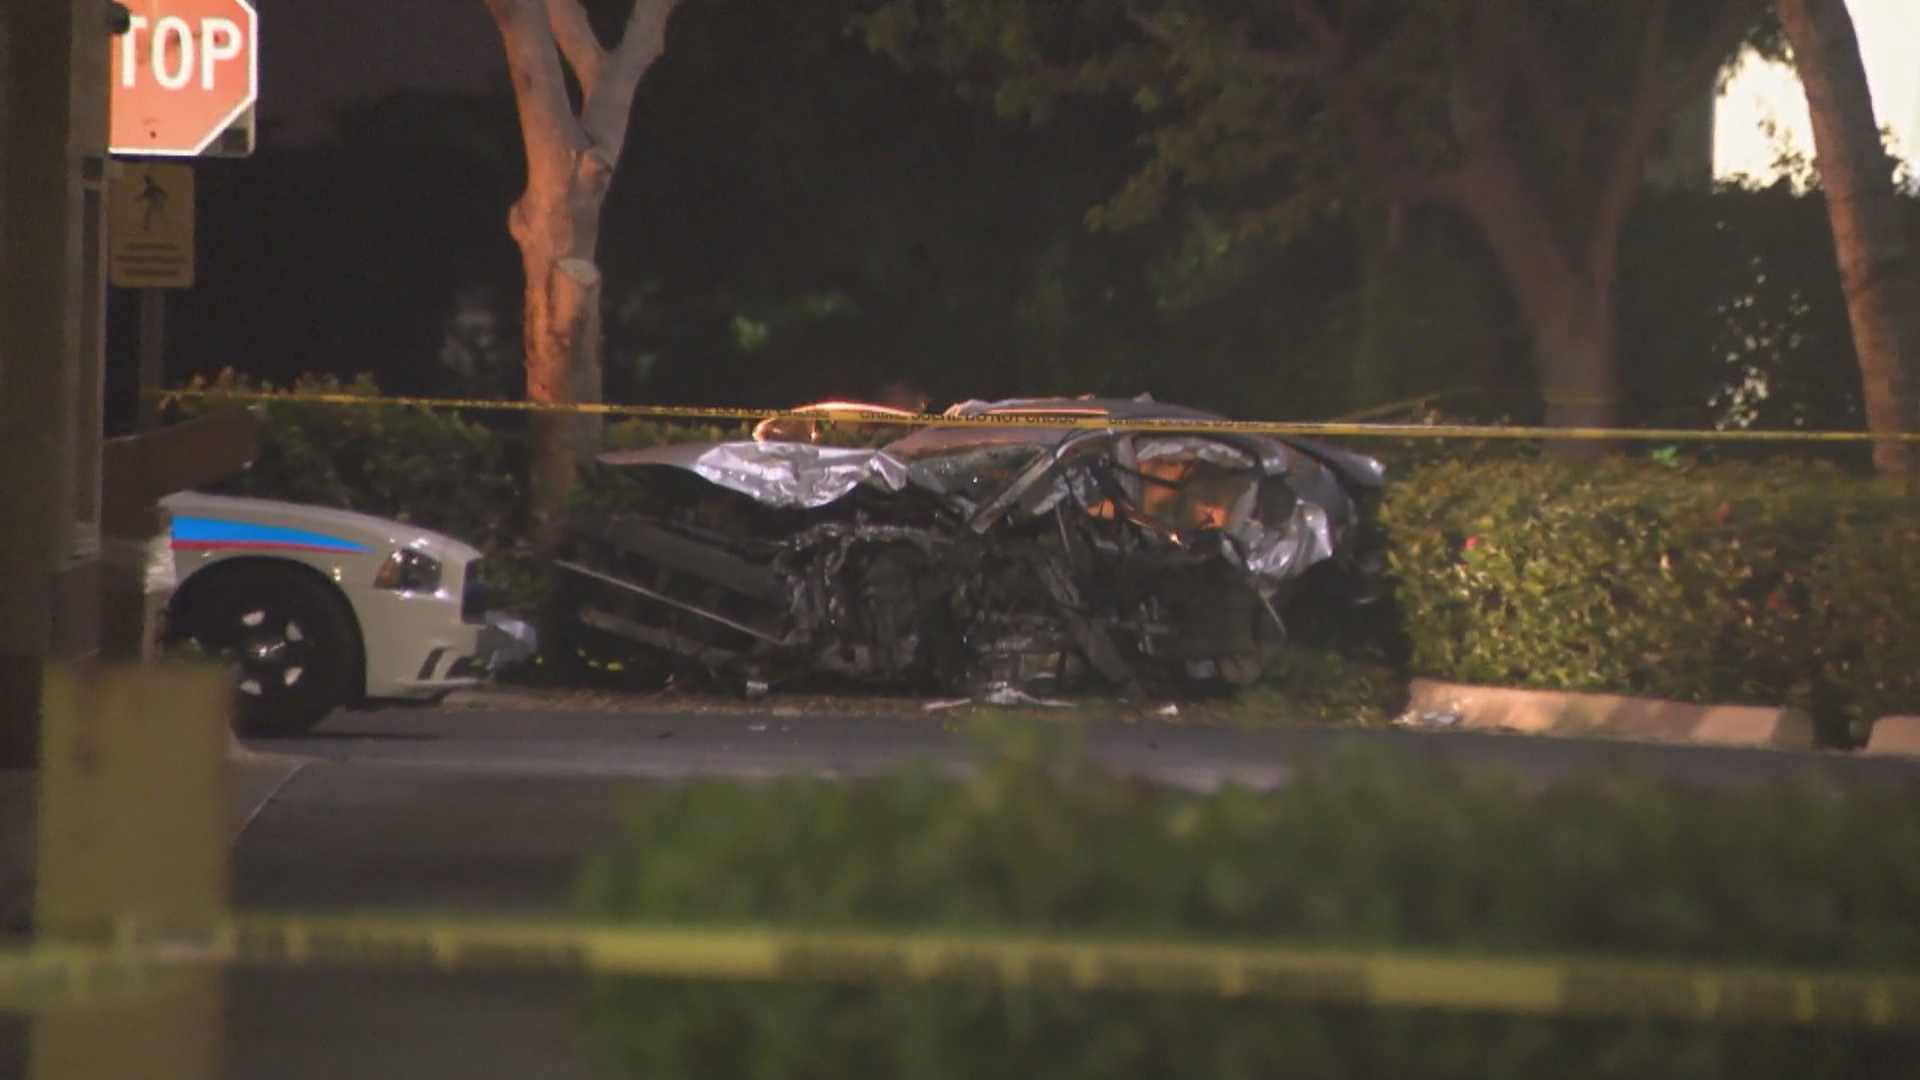 Pregnant Woman Unborn Child Among Those Killed In Multi-car Crash In Homestead